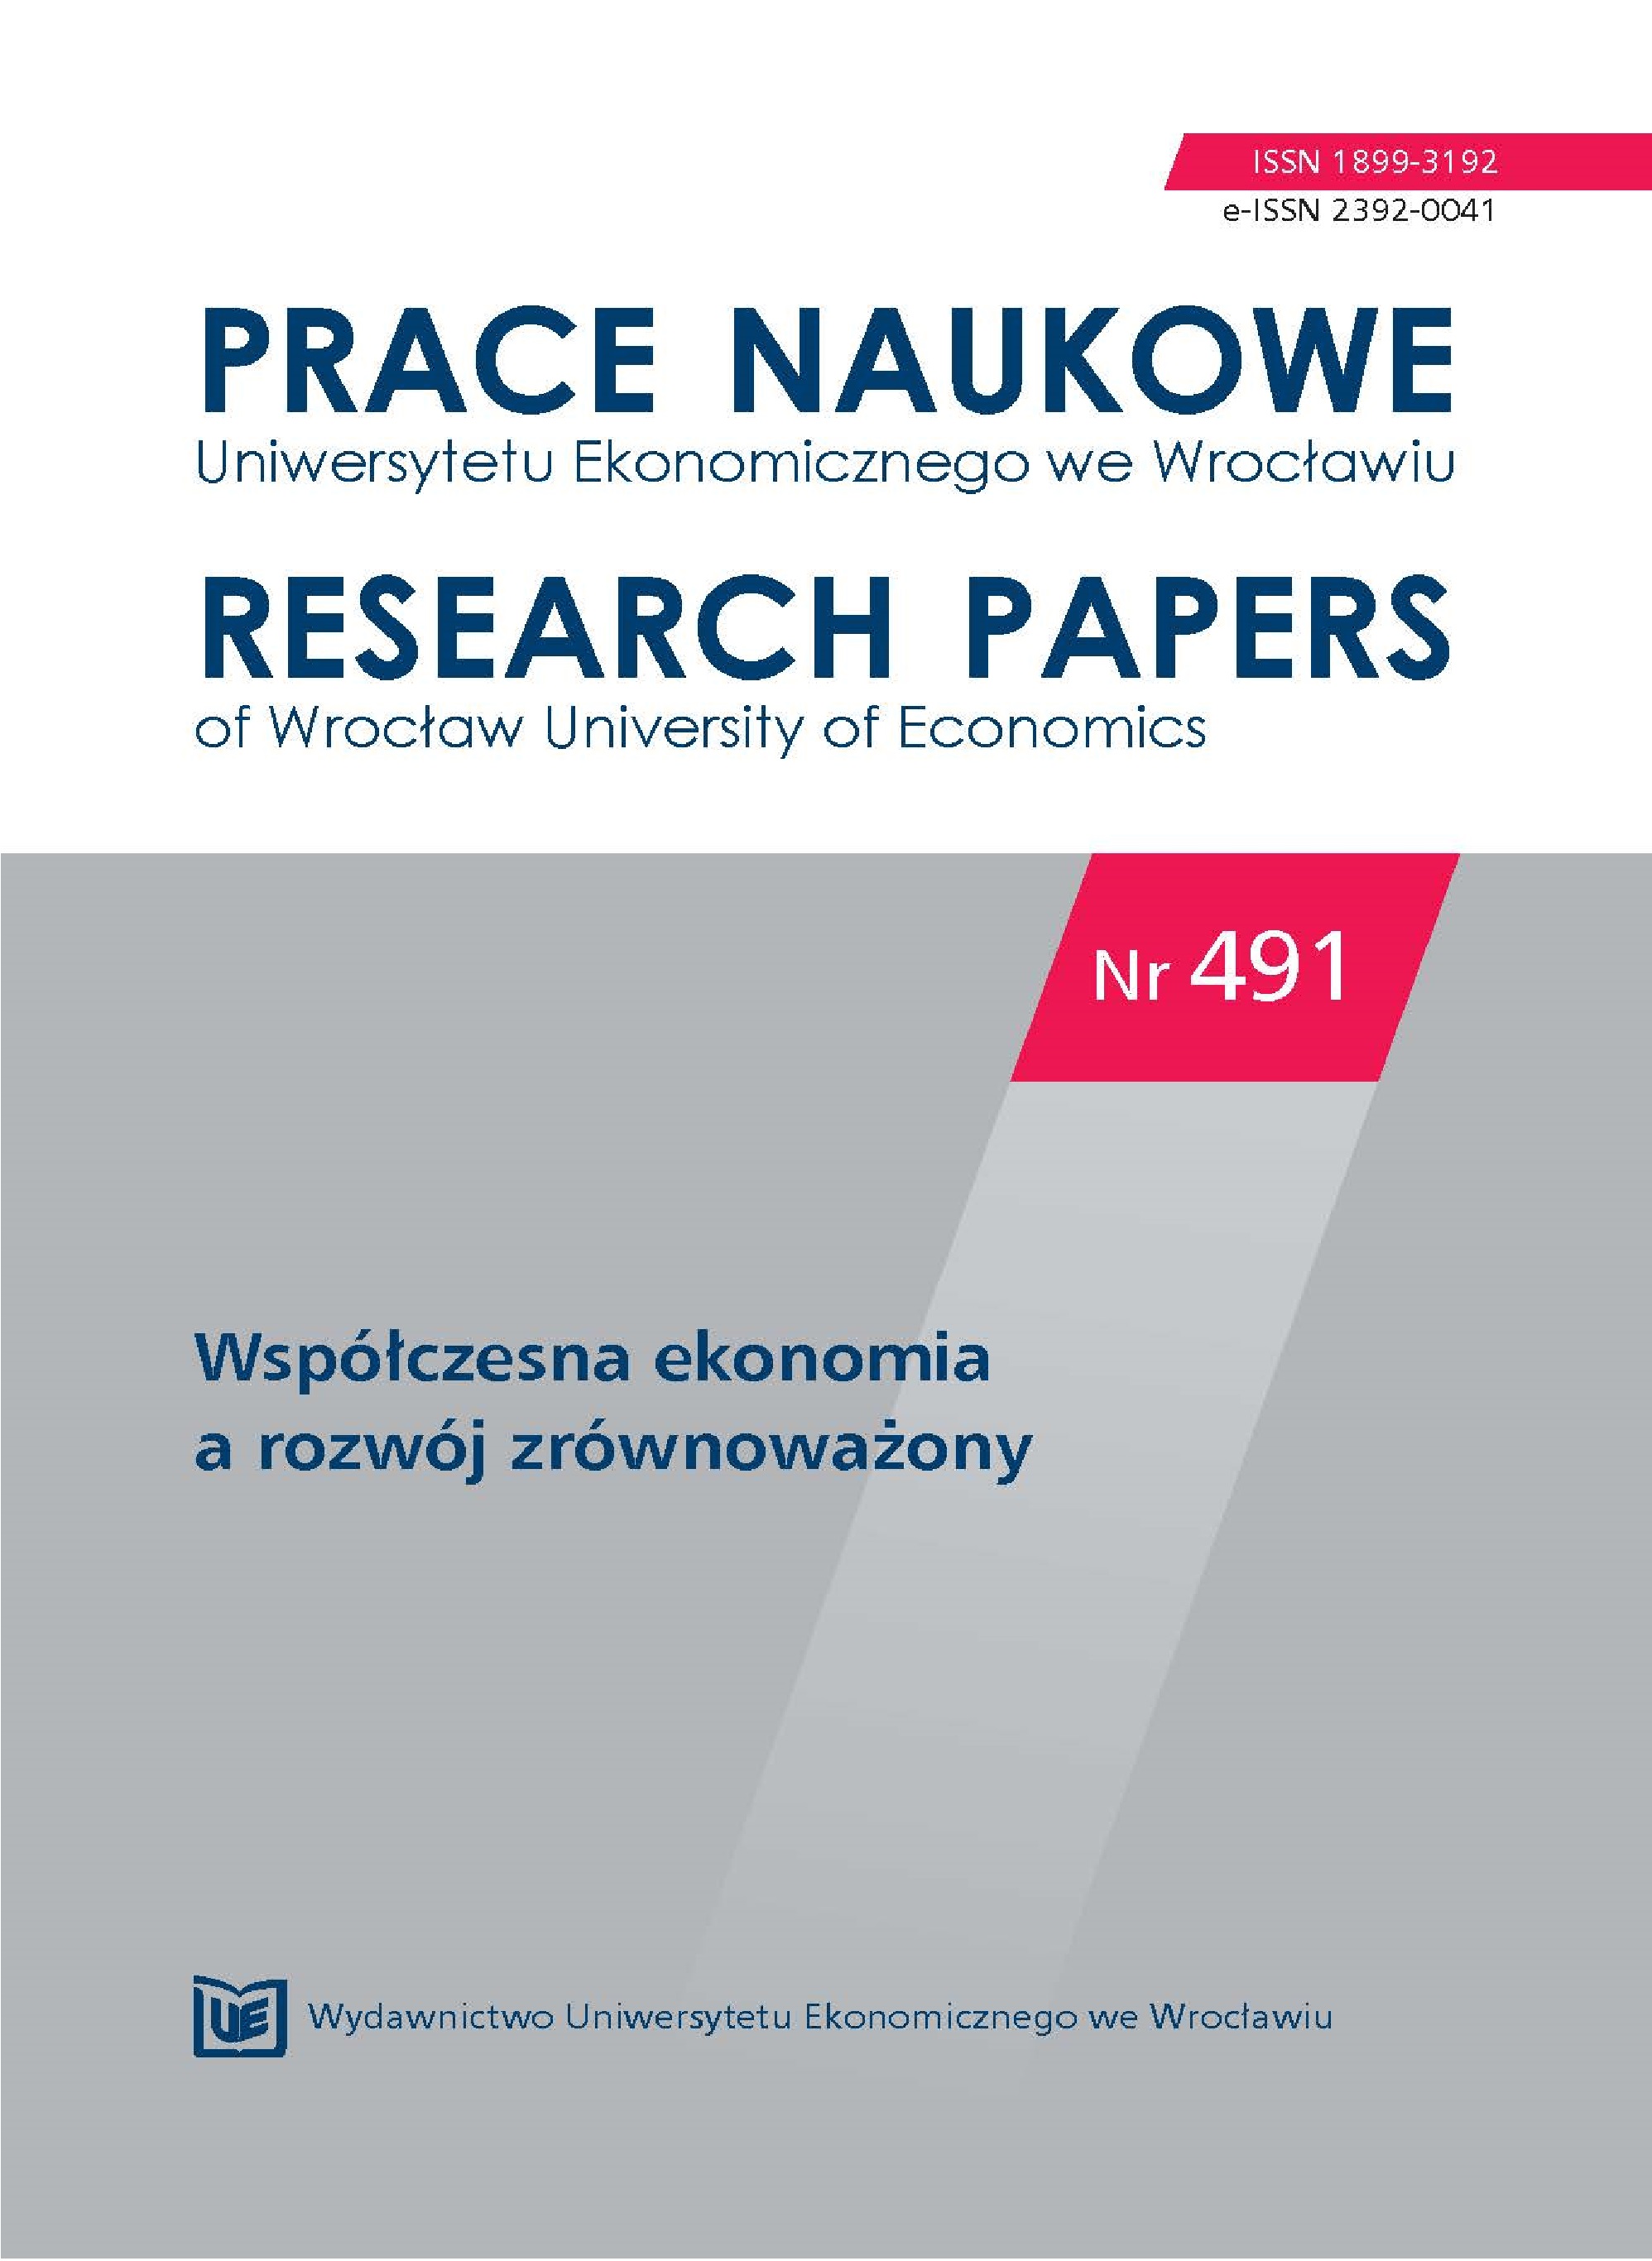 Premises and directions
for reindustrialization of the economy Cover Image